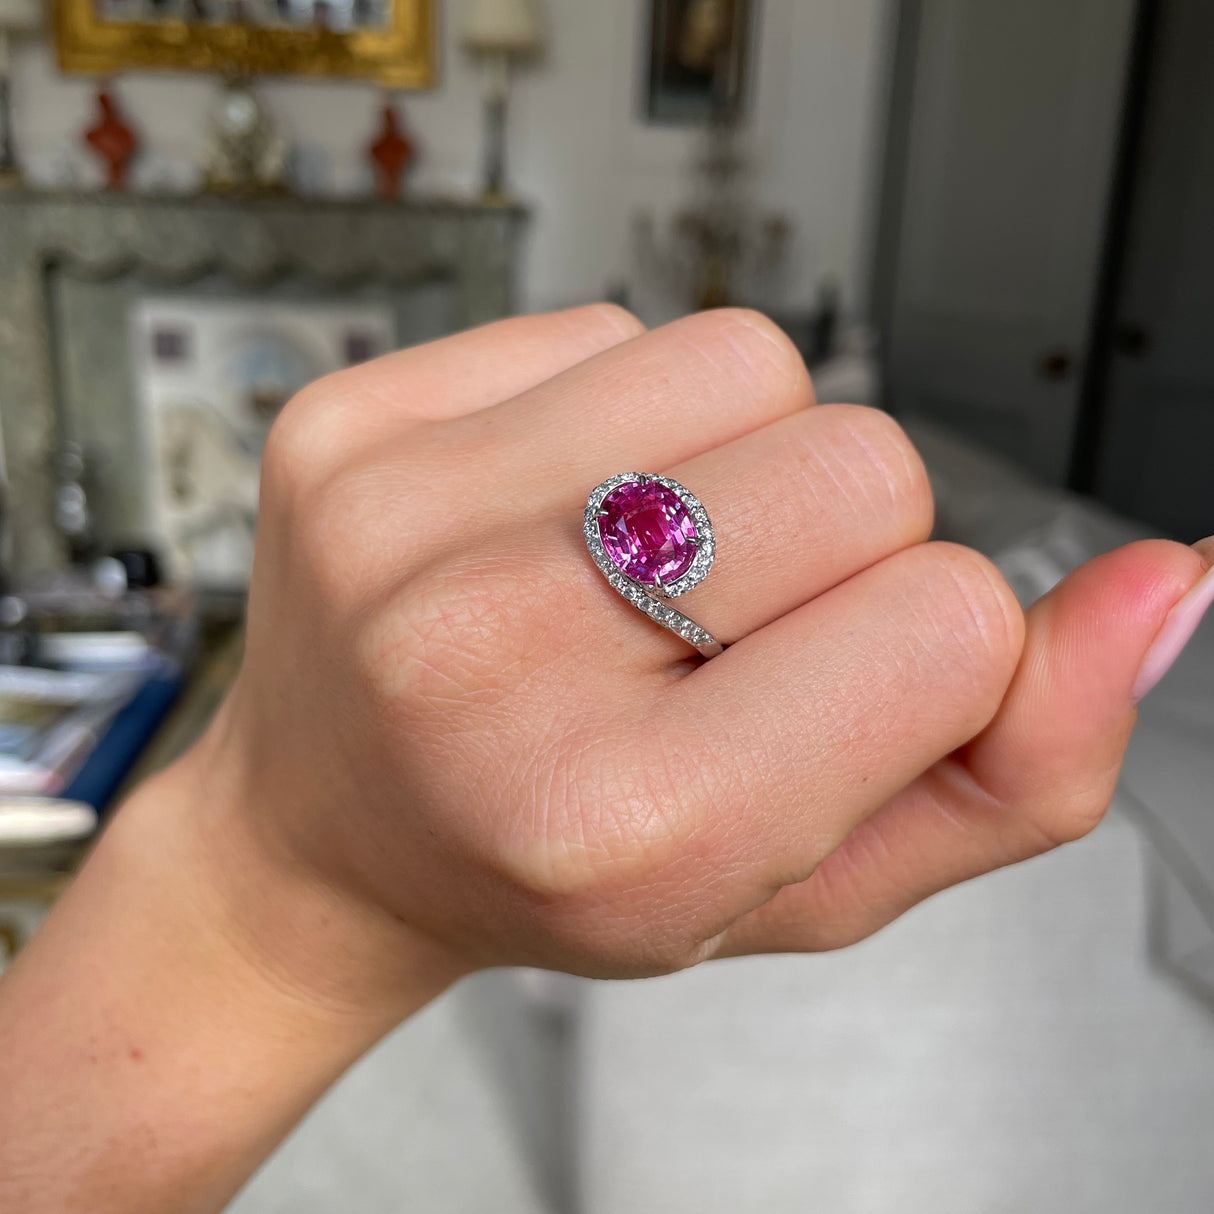 Pink sapphire and diamond engagement ring, worn on closed hand.